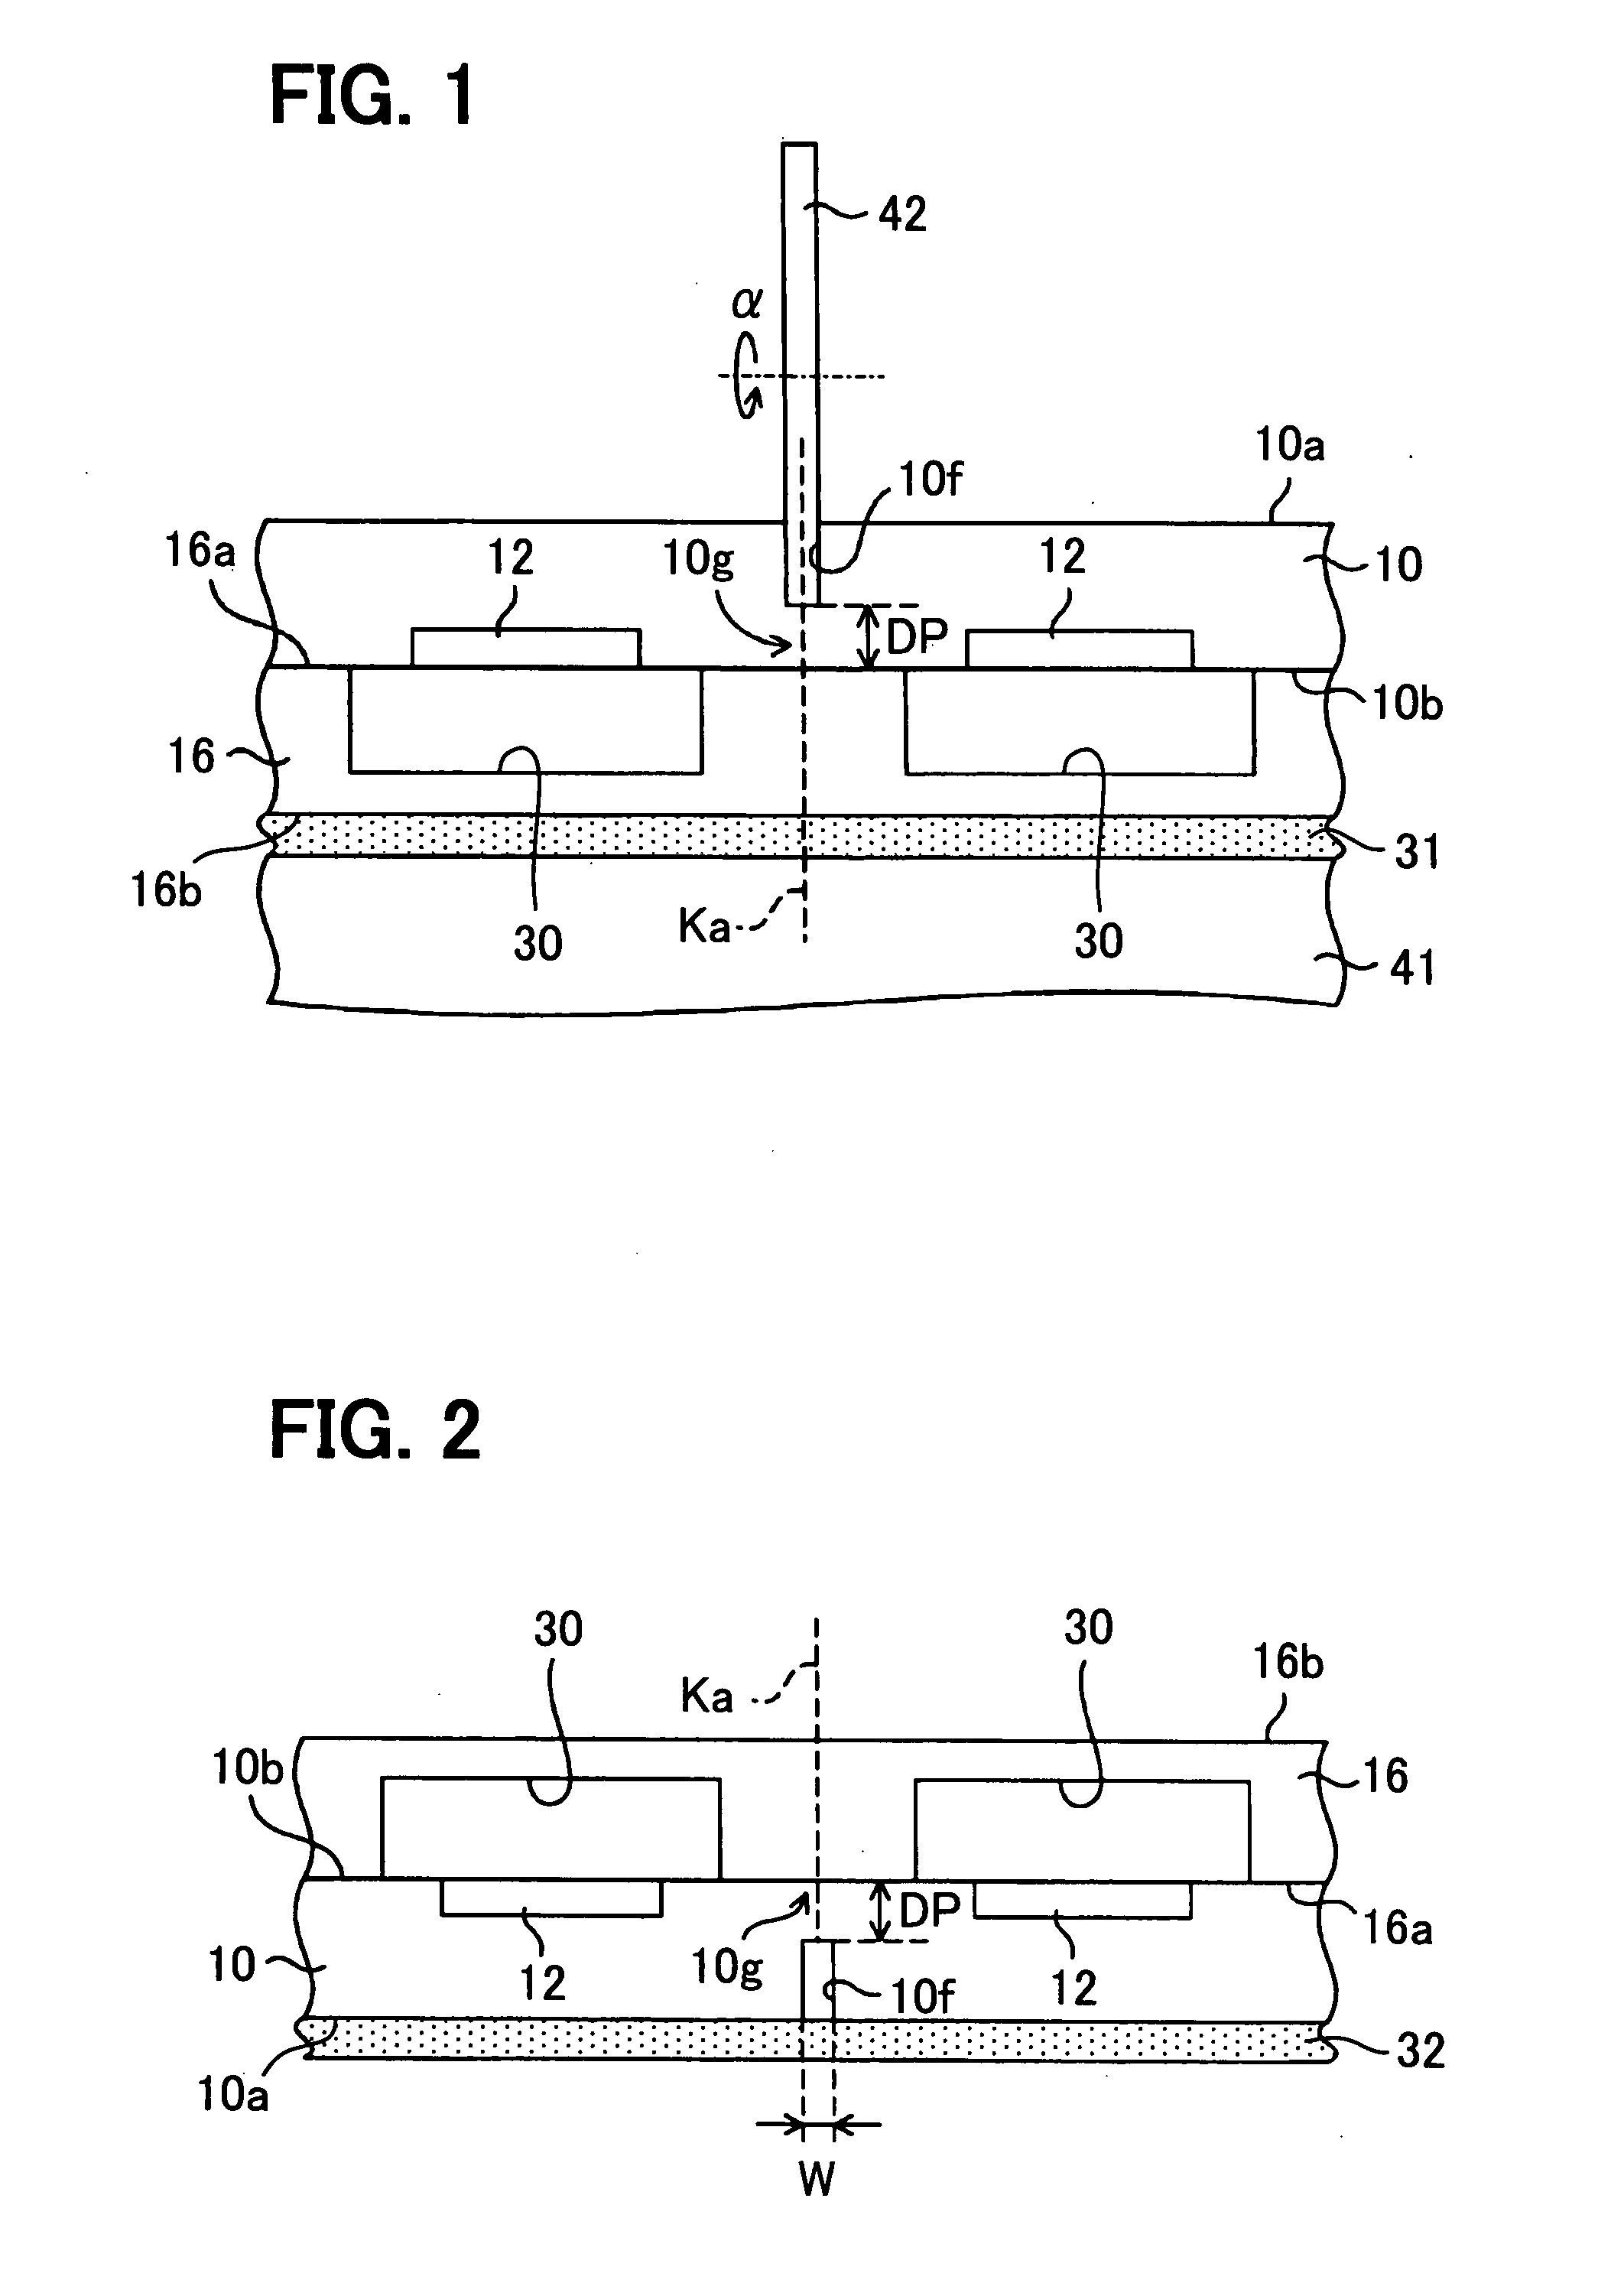 Chip and method for dicing wafer into chips